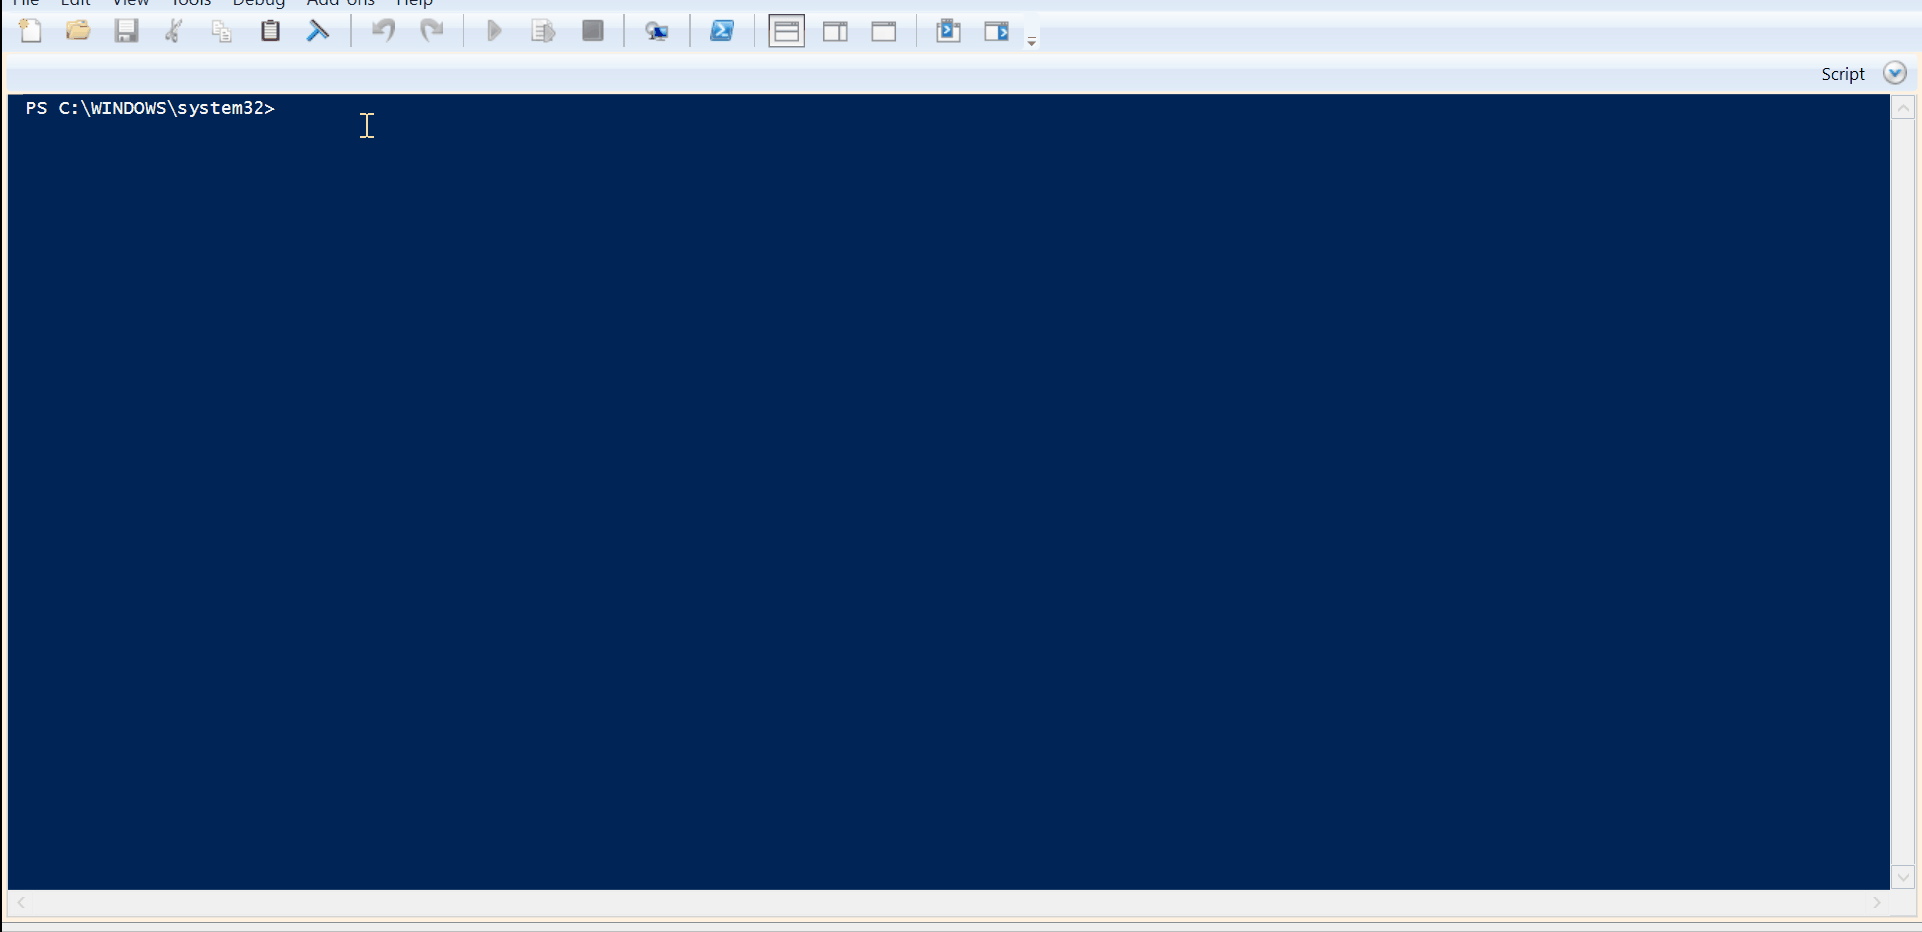 PowerShell Script reports the number of monitored systems